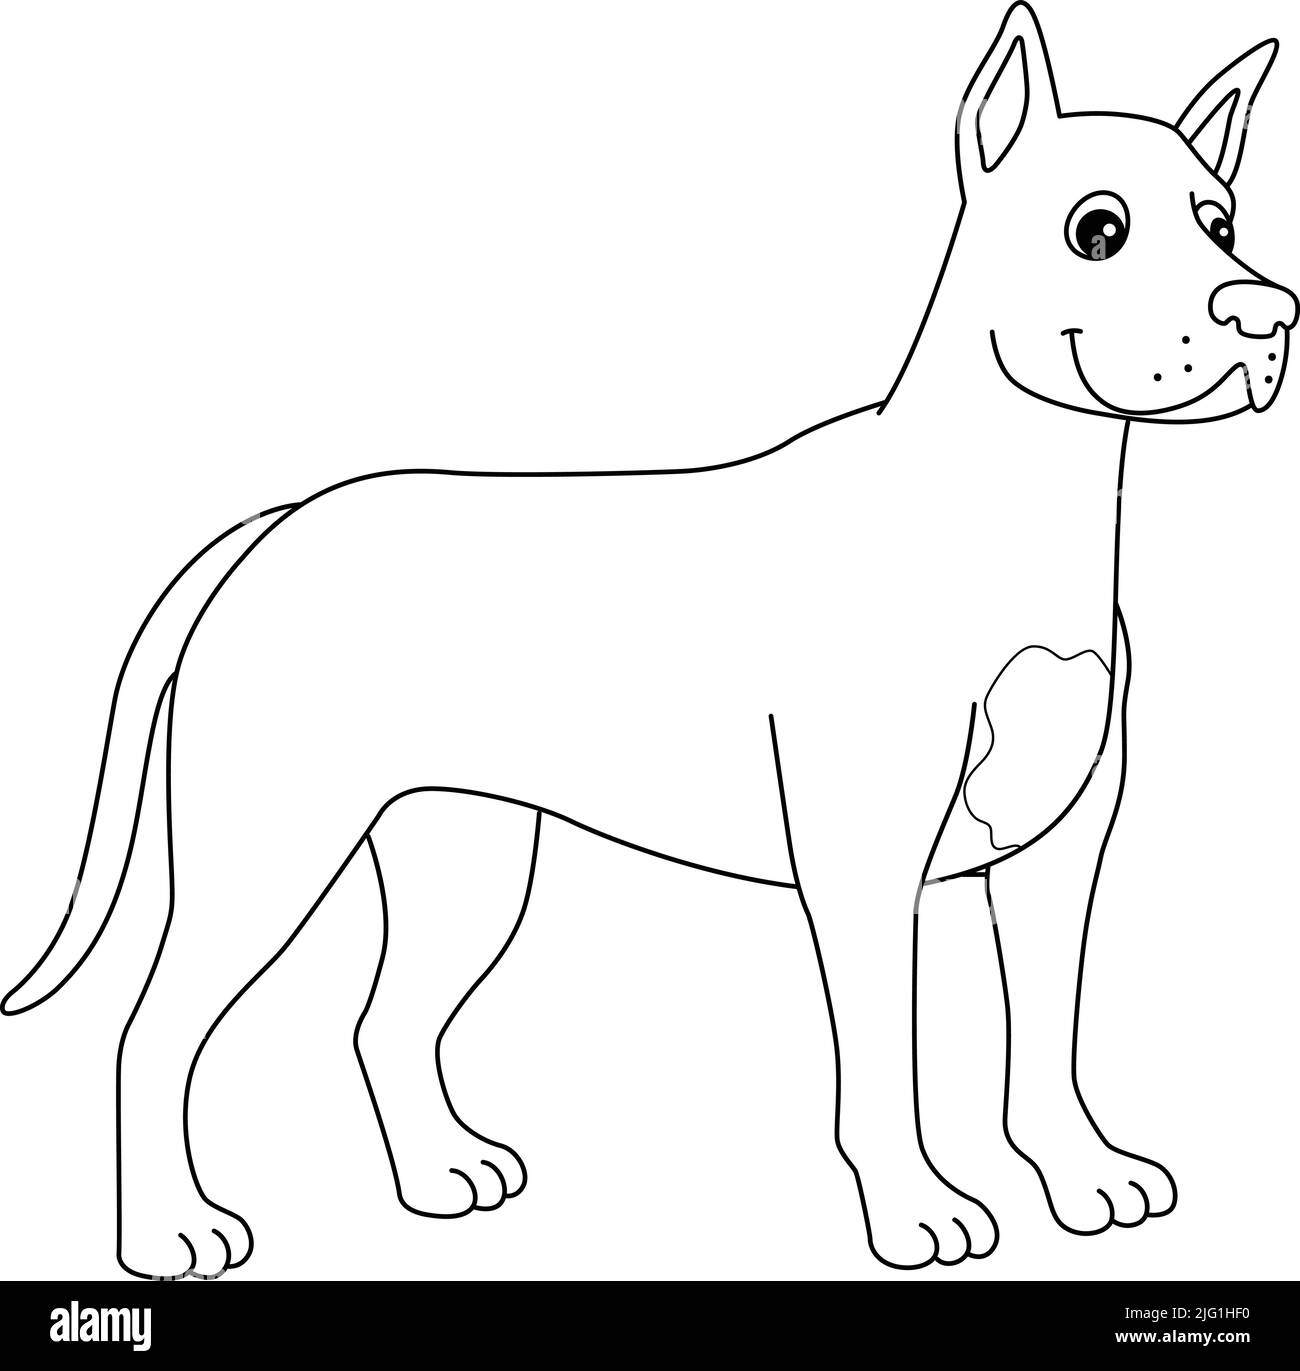 Great Dane Dog Isolated Coloring Page for Kids Stock Vector